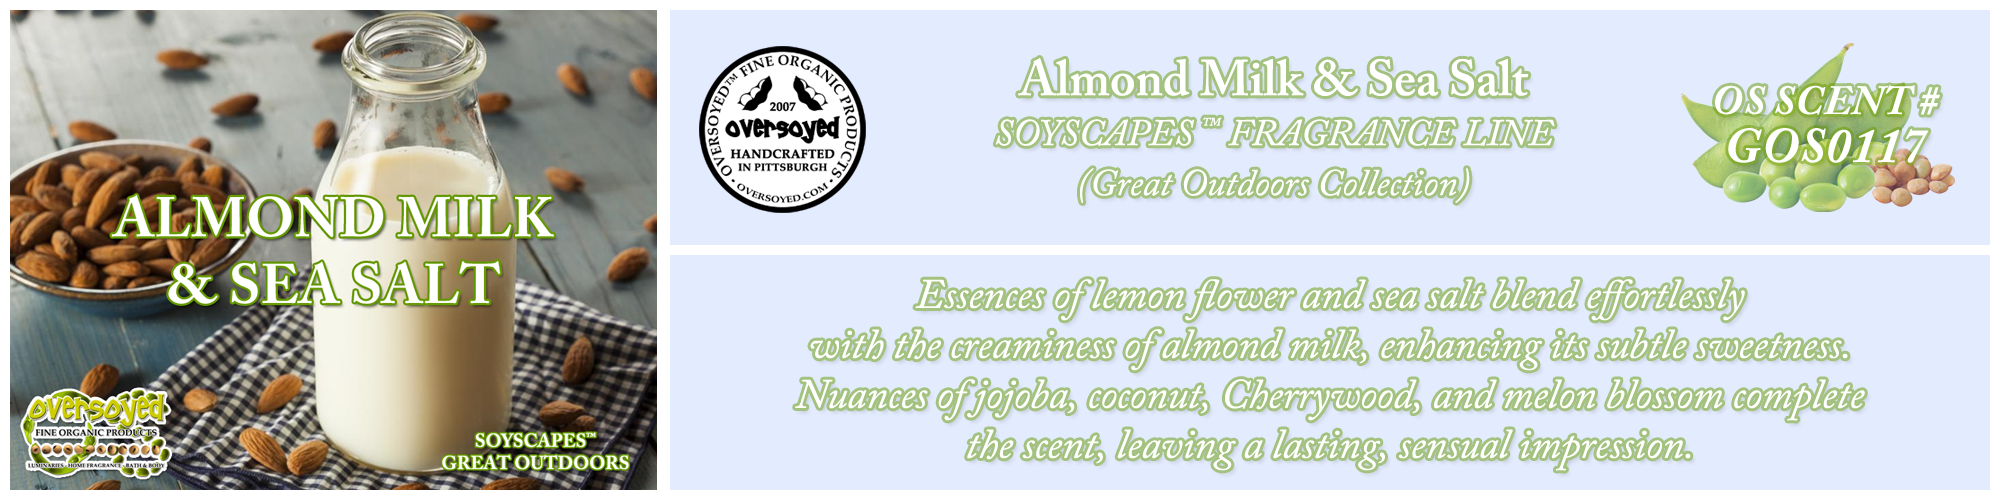 Almond Milk & Sea Salt Handcrafted Products Collection